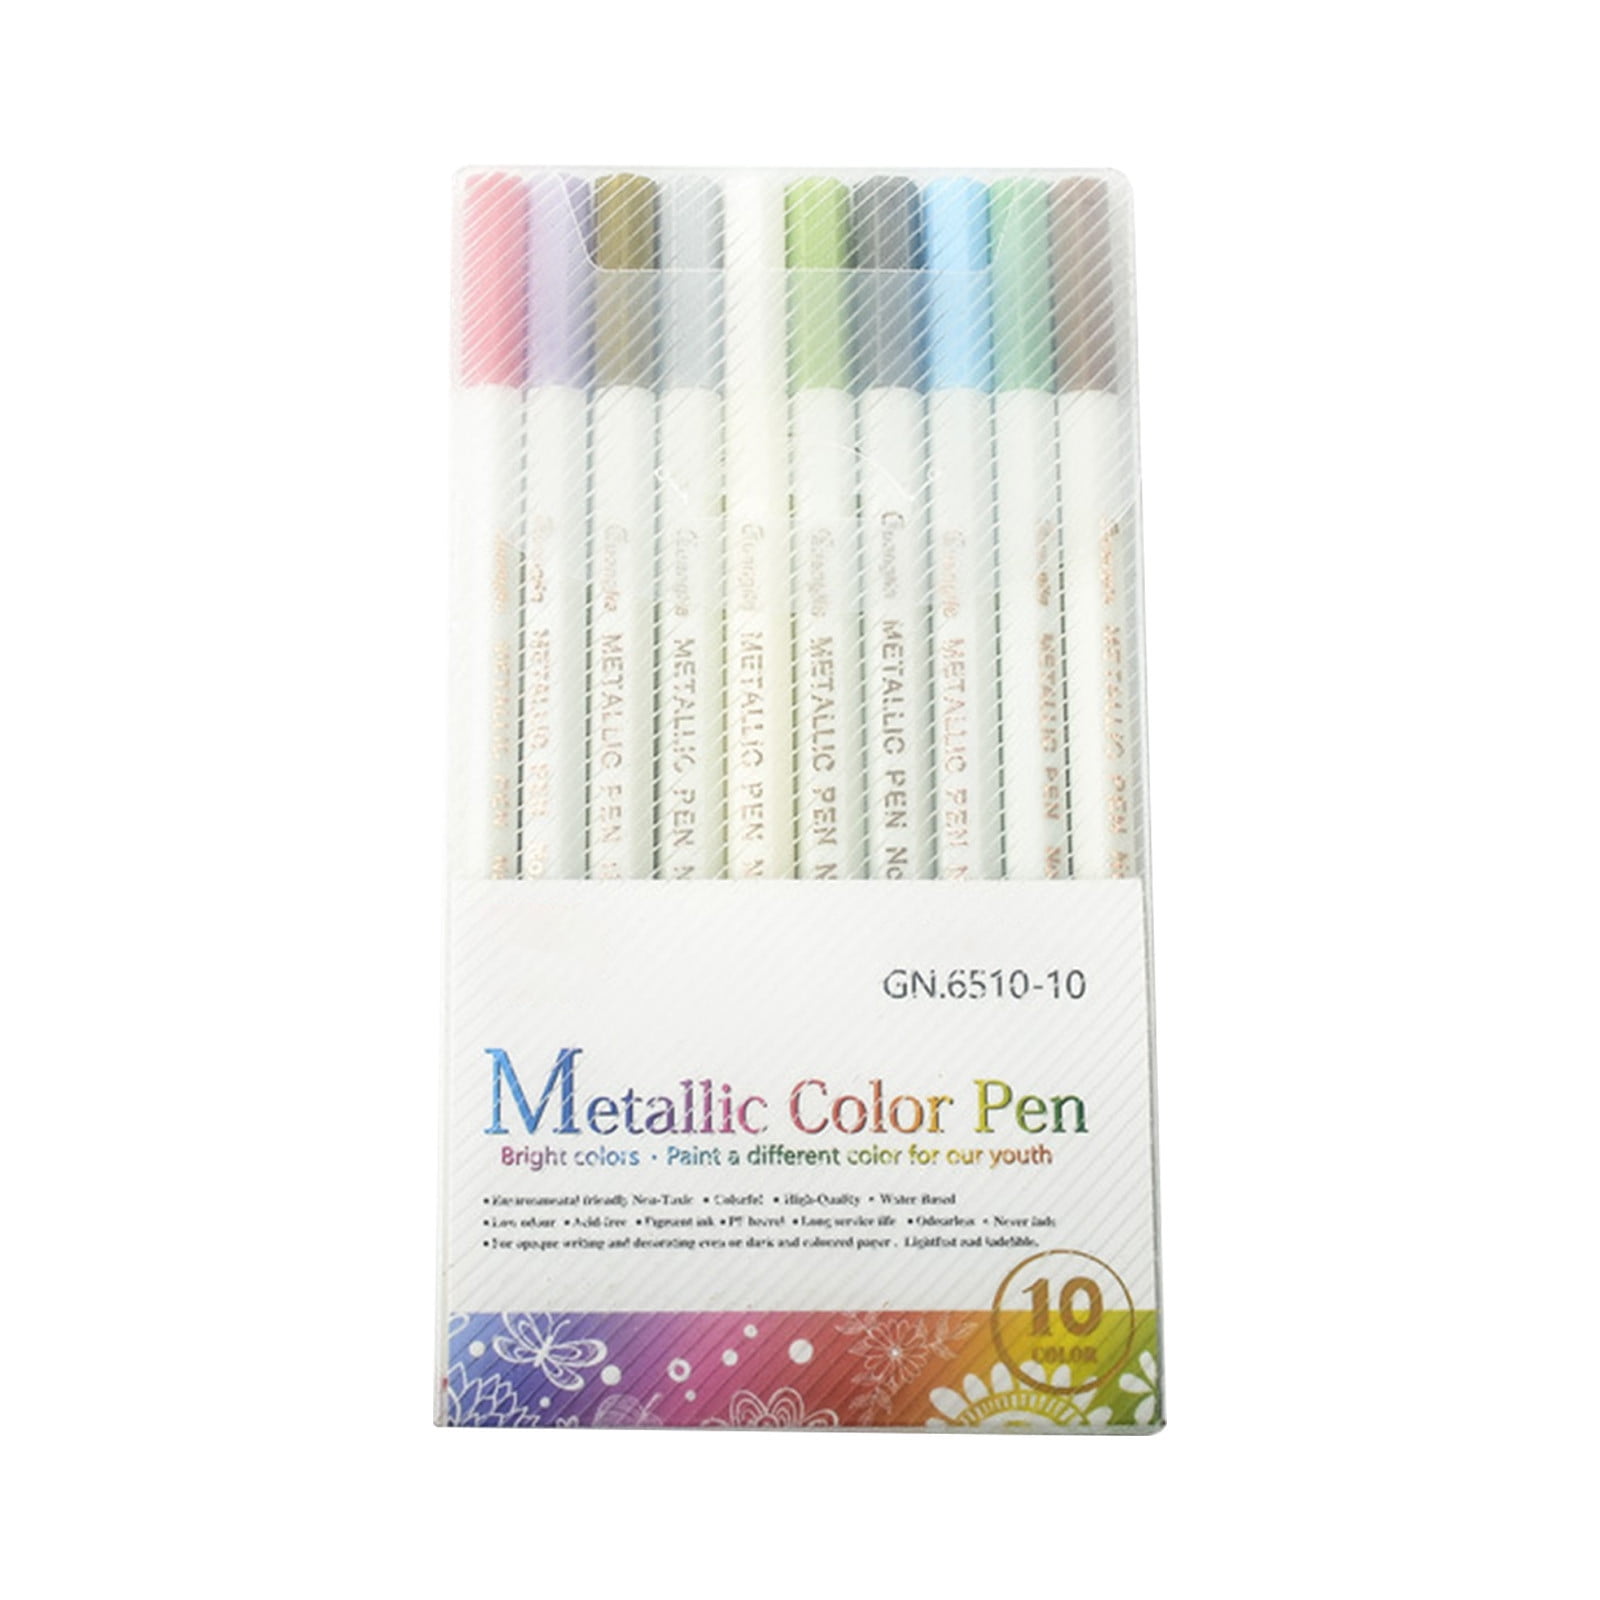 Wholesale Metallic Paint Bullet Journal Markers Set For Rock Painting,  Photo Albums, And Scrapbooking From Xue10, $10.67